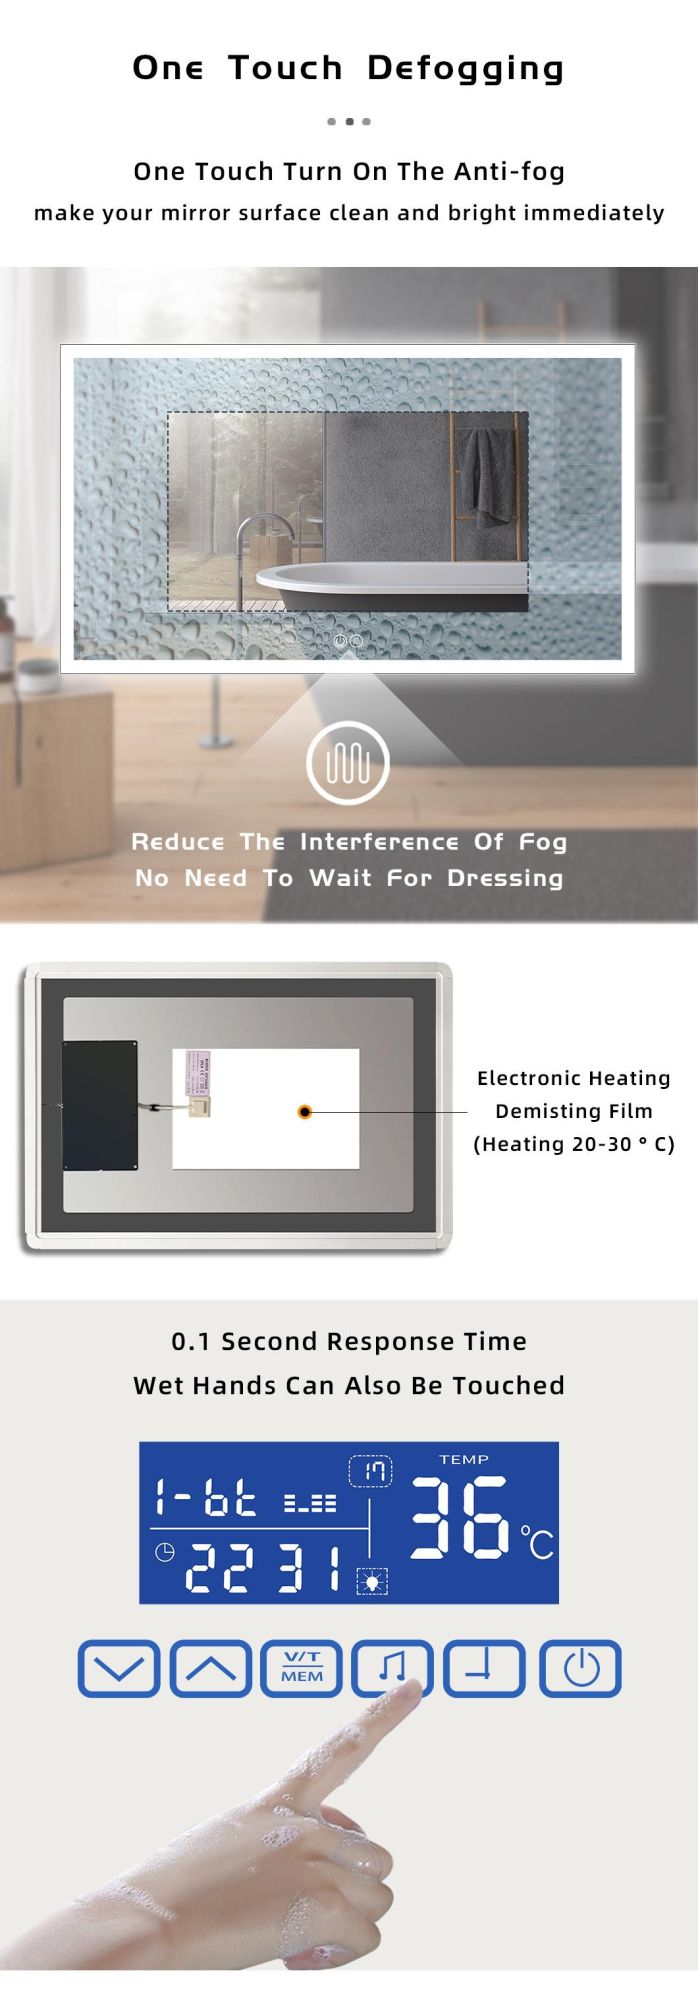 LED Customized Wall Mounted Glass WiFi Magic Mirror Touch Screen Dimmer Bath Lights Smart LED Bathroom Mirror